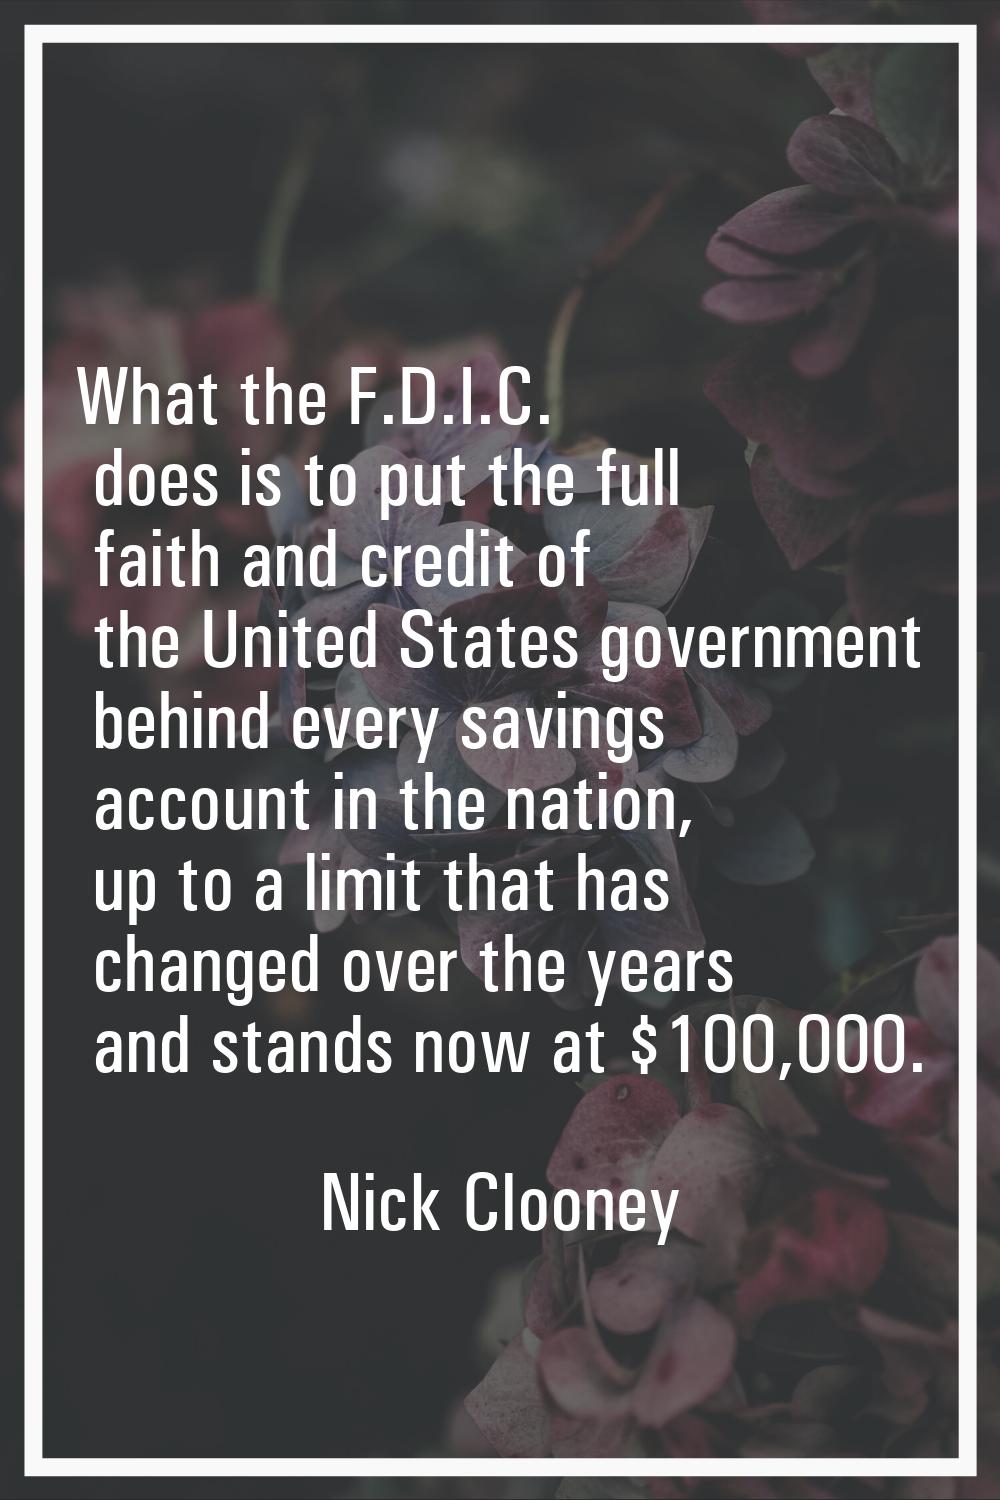 What the F.D.I.C. does is to put the full faith and credit of the United States government behind e